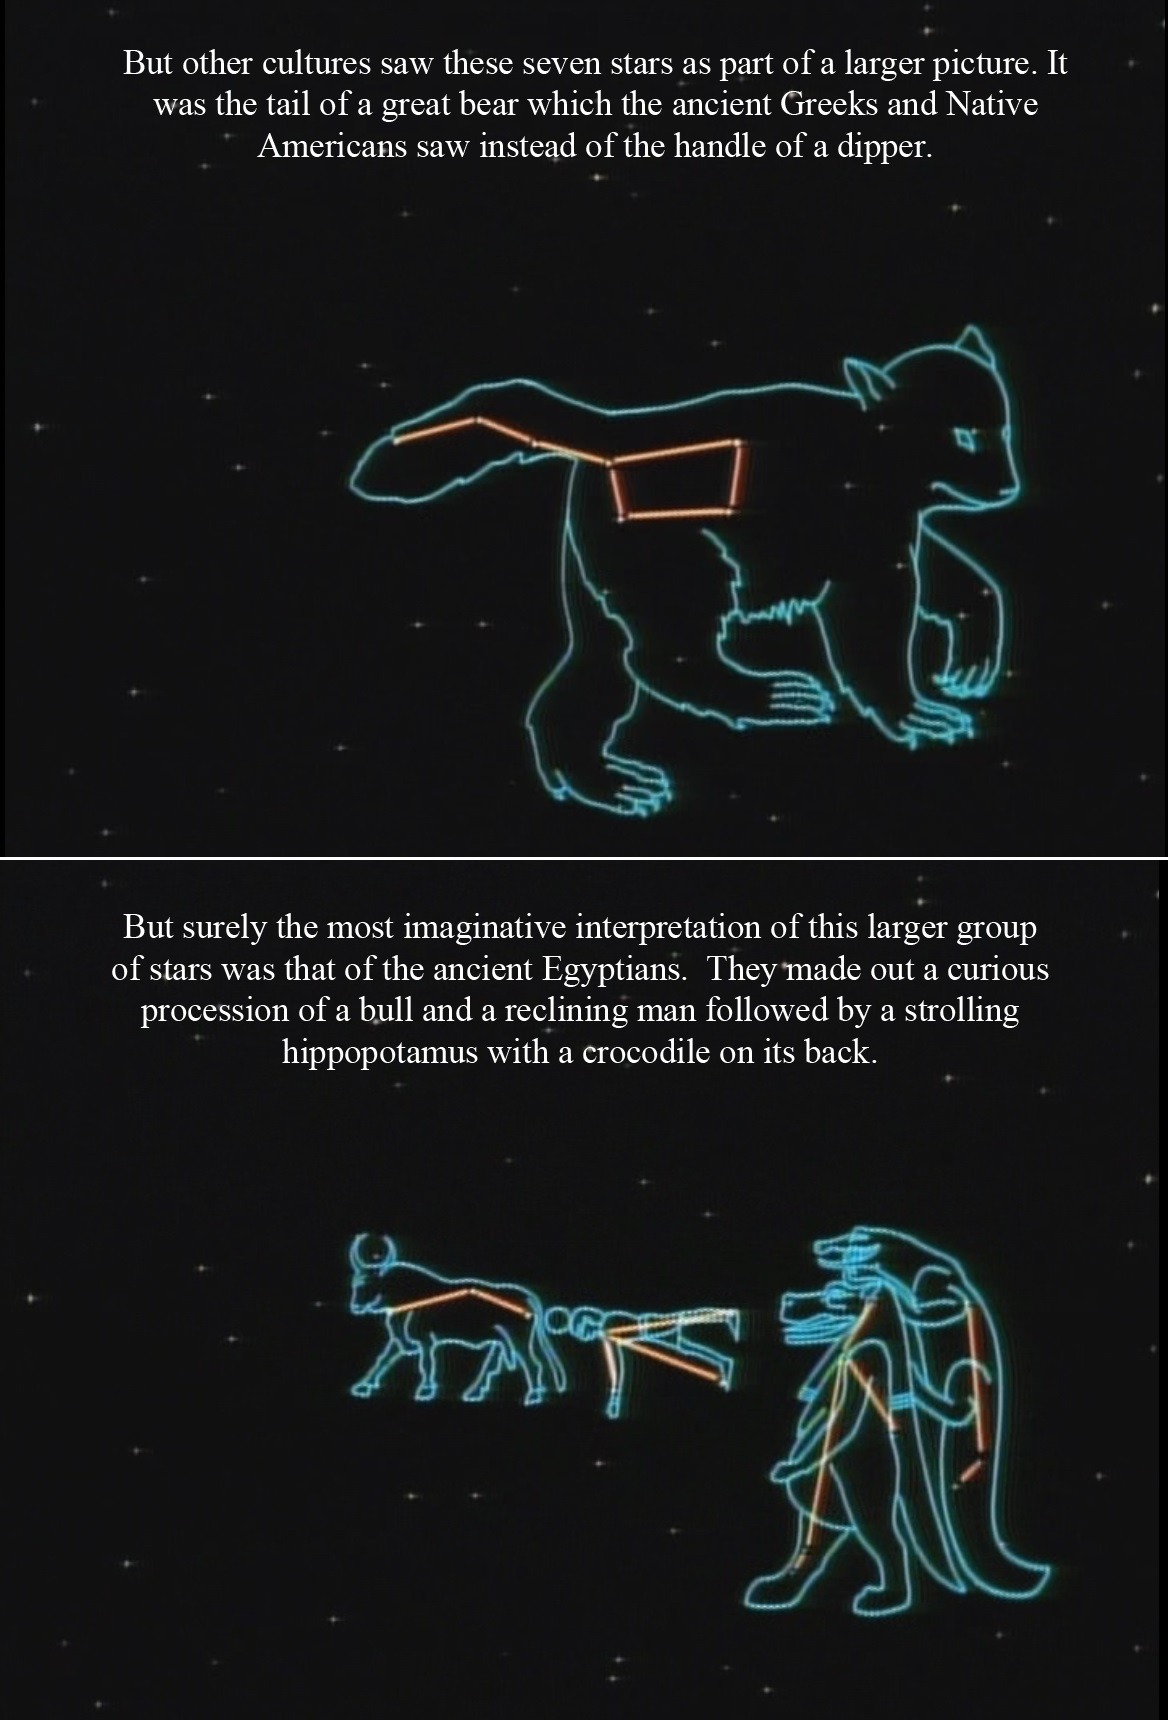 But other cultures saw these seven stars as part of a larger picture. It was the tail of a great bear which the ancient Greeks and Native Americans saw instead of the handle of a dipper. But surely the most imaginative interpretation of this larger group of stars was that of the ancient Egyptians. They made out a curious progression of a bull and a reclining man followed by a strolling hippopotamus with a crocodile on its back.